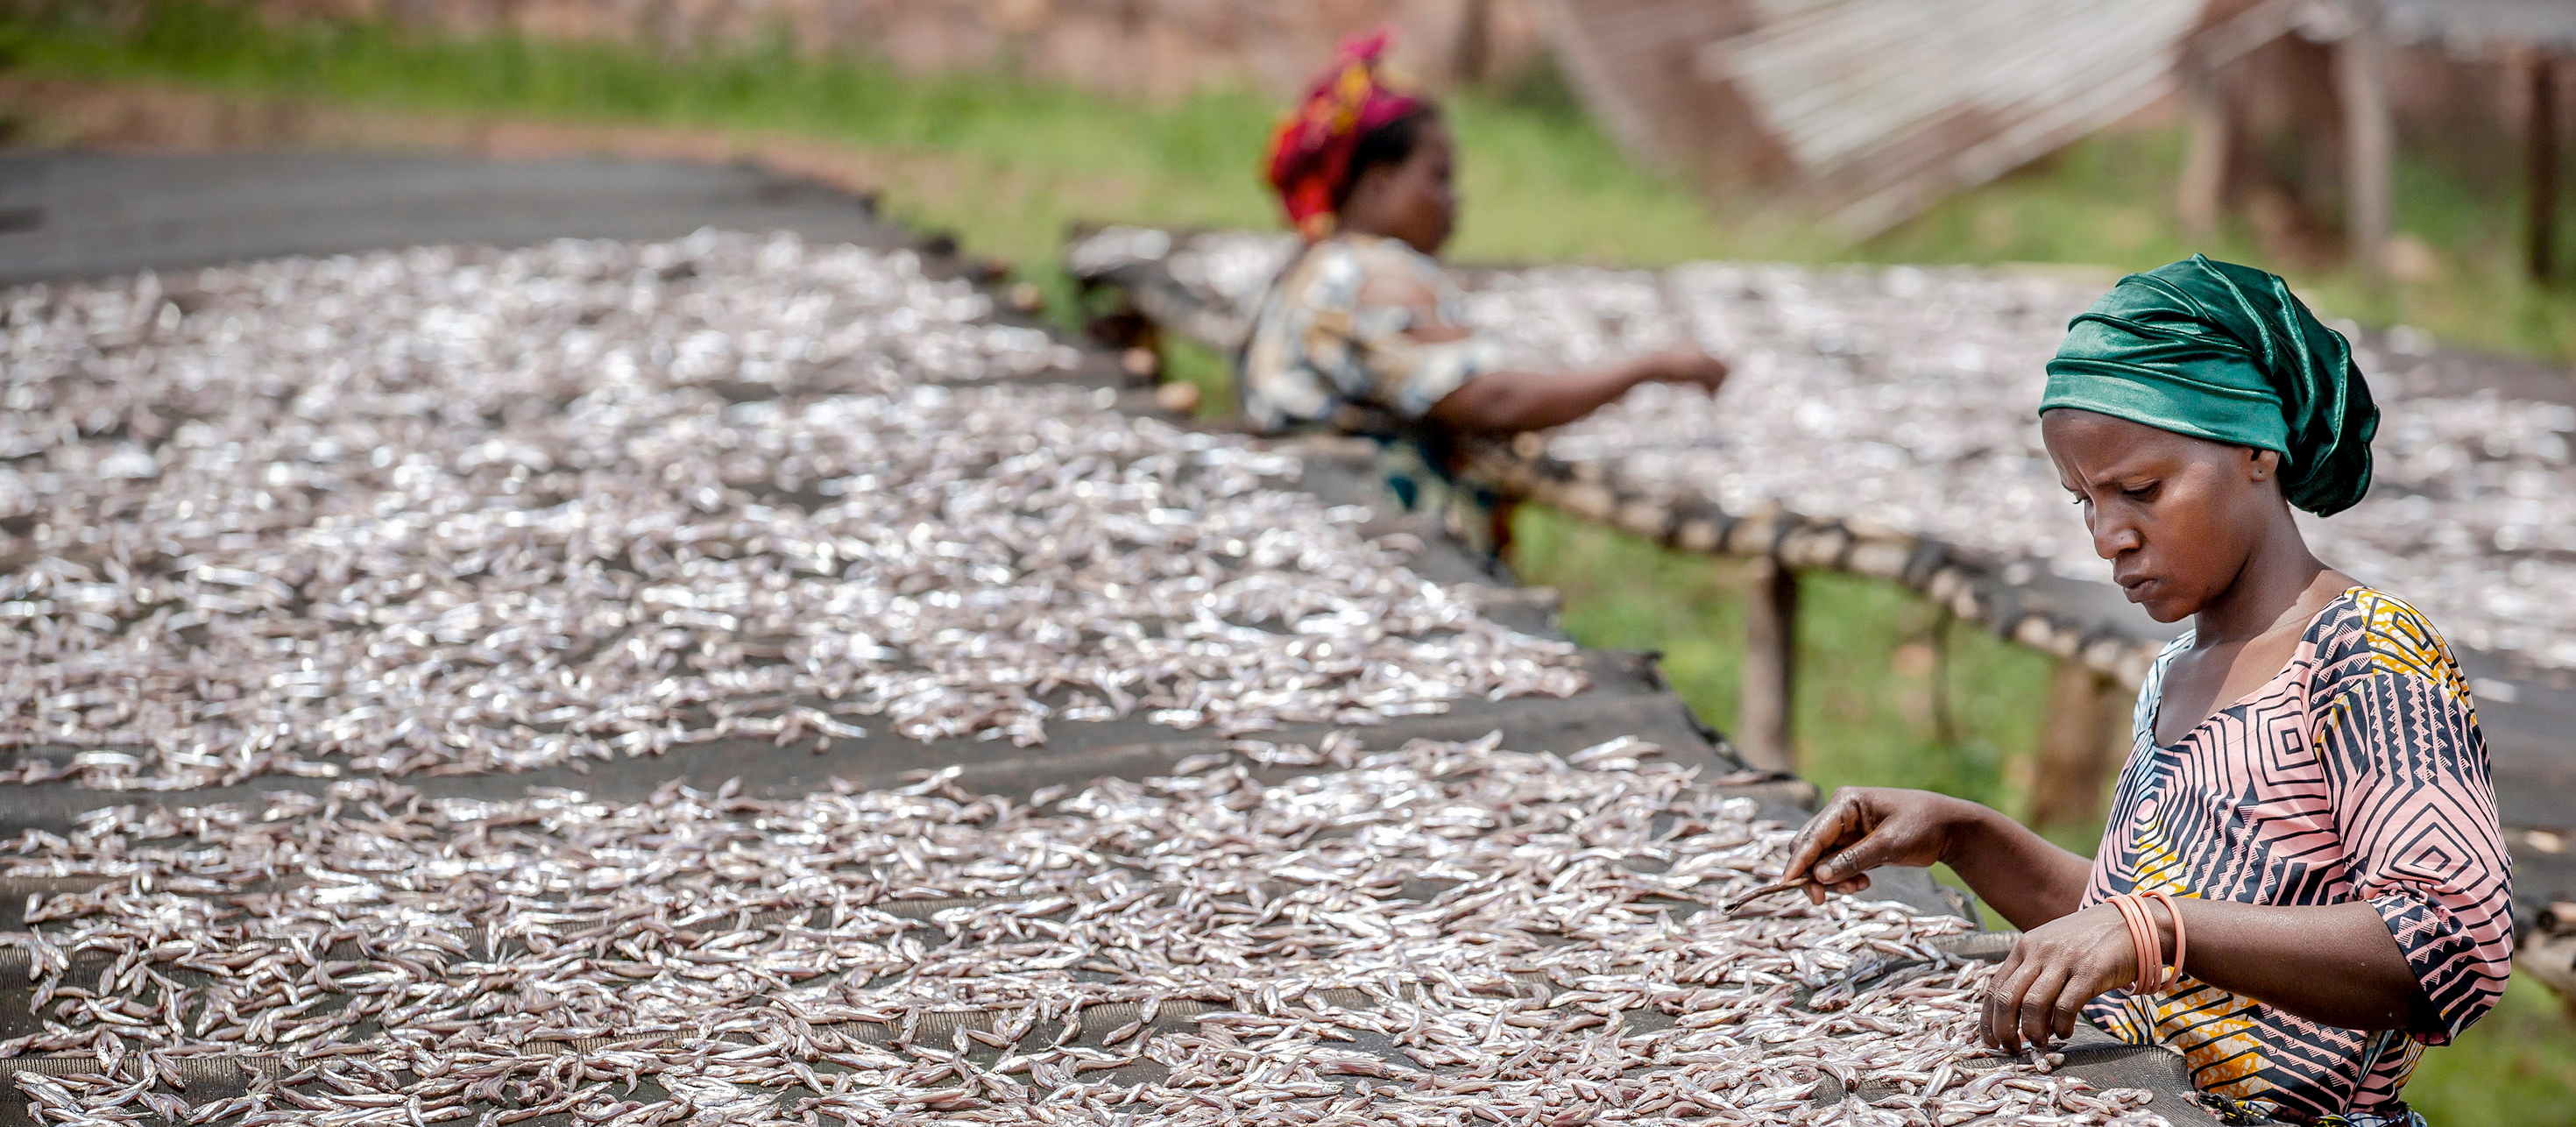 A woman puts fresh sprat to sun dry in a drying area next to the shore of the Lake Tanganyika in Kigoma, Tanzania